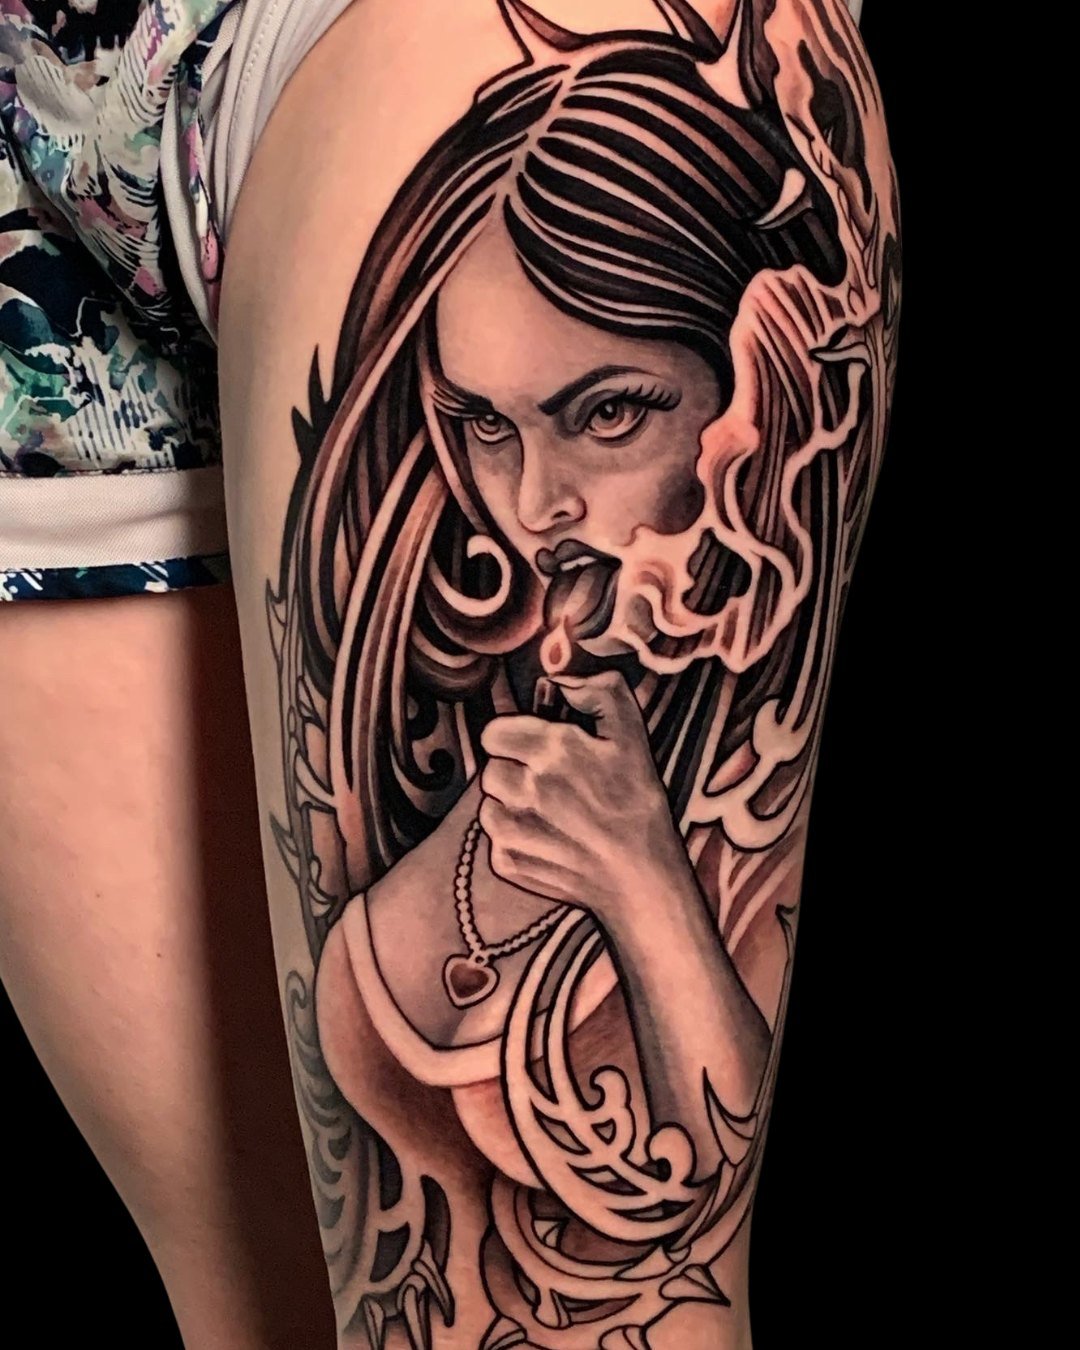 &quot;I am a god.&quot; ❤️&zwj;🔥

This black and gray illustrative Jennifer's Body tattoo by @izzytattoo1224 is on fire 🔥

Izzy's signature style combines bold, high contrast black ink with greywashing throughout to add dimension. He loves tattooin